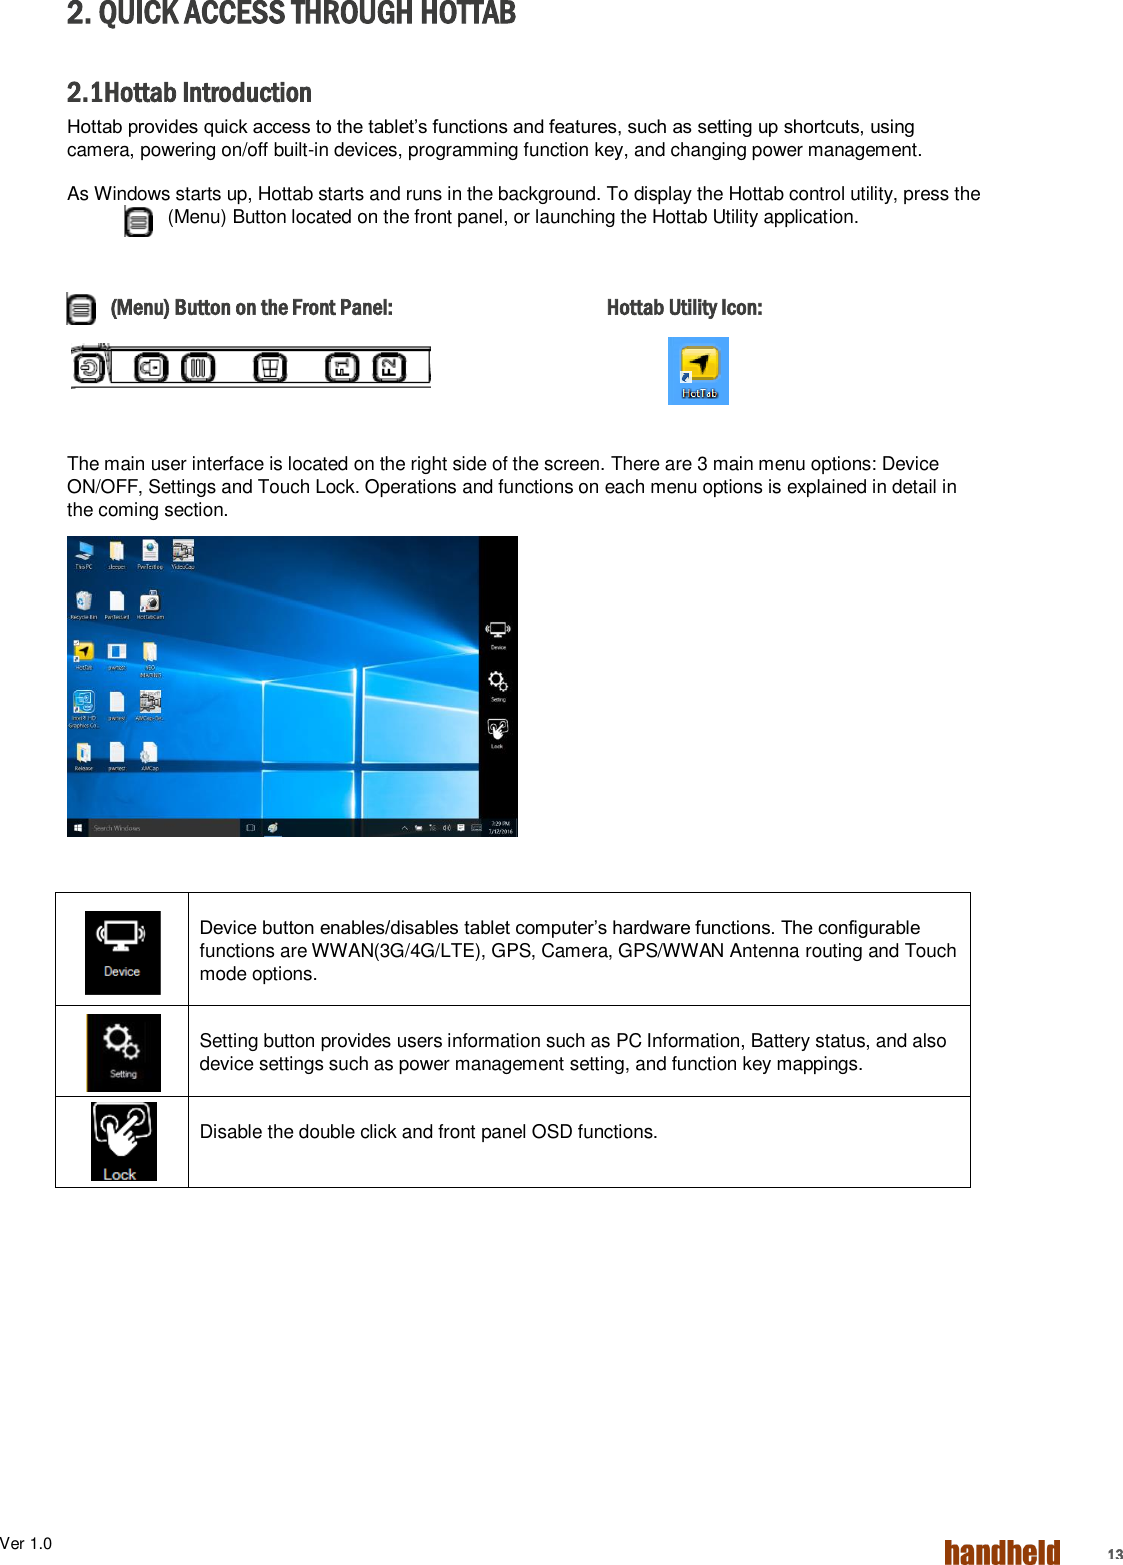 Ver 1.0    13 2. QUICK ACCESS THROUGH HOTTAB  2.1Hottab Introduction Hottab provides quick access to the tablet’s functions and features, such as setting up shortcuts, using camera, powering on/off built-in devices, programming function key, and changing power management. As Windows starts up, Hottab starts and runs in the background. To display the Hottab control utility, press the  (Menu) Button located on the front panel, or launching the Hottab Utility application.  (Menu) Button on the Front Panel:      Hottab Utility Icon:    The main user interface is located on the right side of the screen. There are 3 main menu options: Device ON/OFF, Settings and Touch Lock. Operations and functions on each menu options is explained in detail in the coming section.           Device button enables/disables tablet computer’s hardware functions. The configurable functions are WWAN(3G/4G/LTE), GPS, Camera, GPS/WWAN Antenna routing and Touch mode options.   Setting button provides users information such as PC Information, Battery status, and also device settings such as power management setting, and function key mappings.   Disable the double click and front panel OSD functions.     